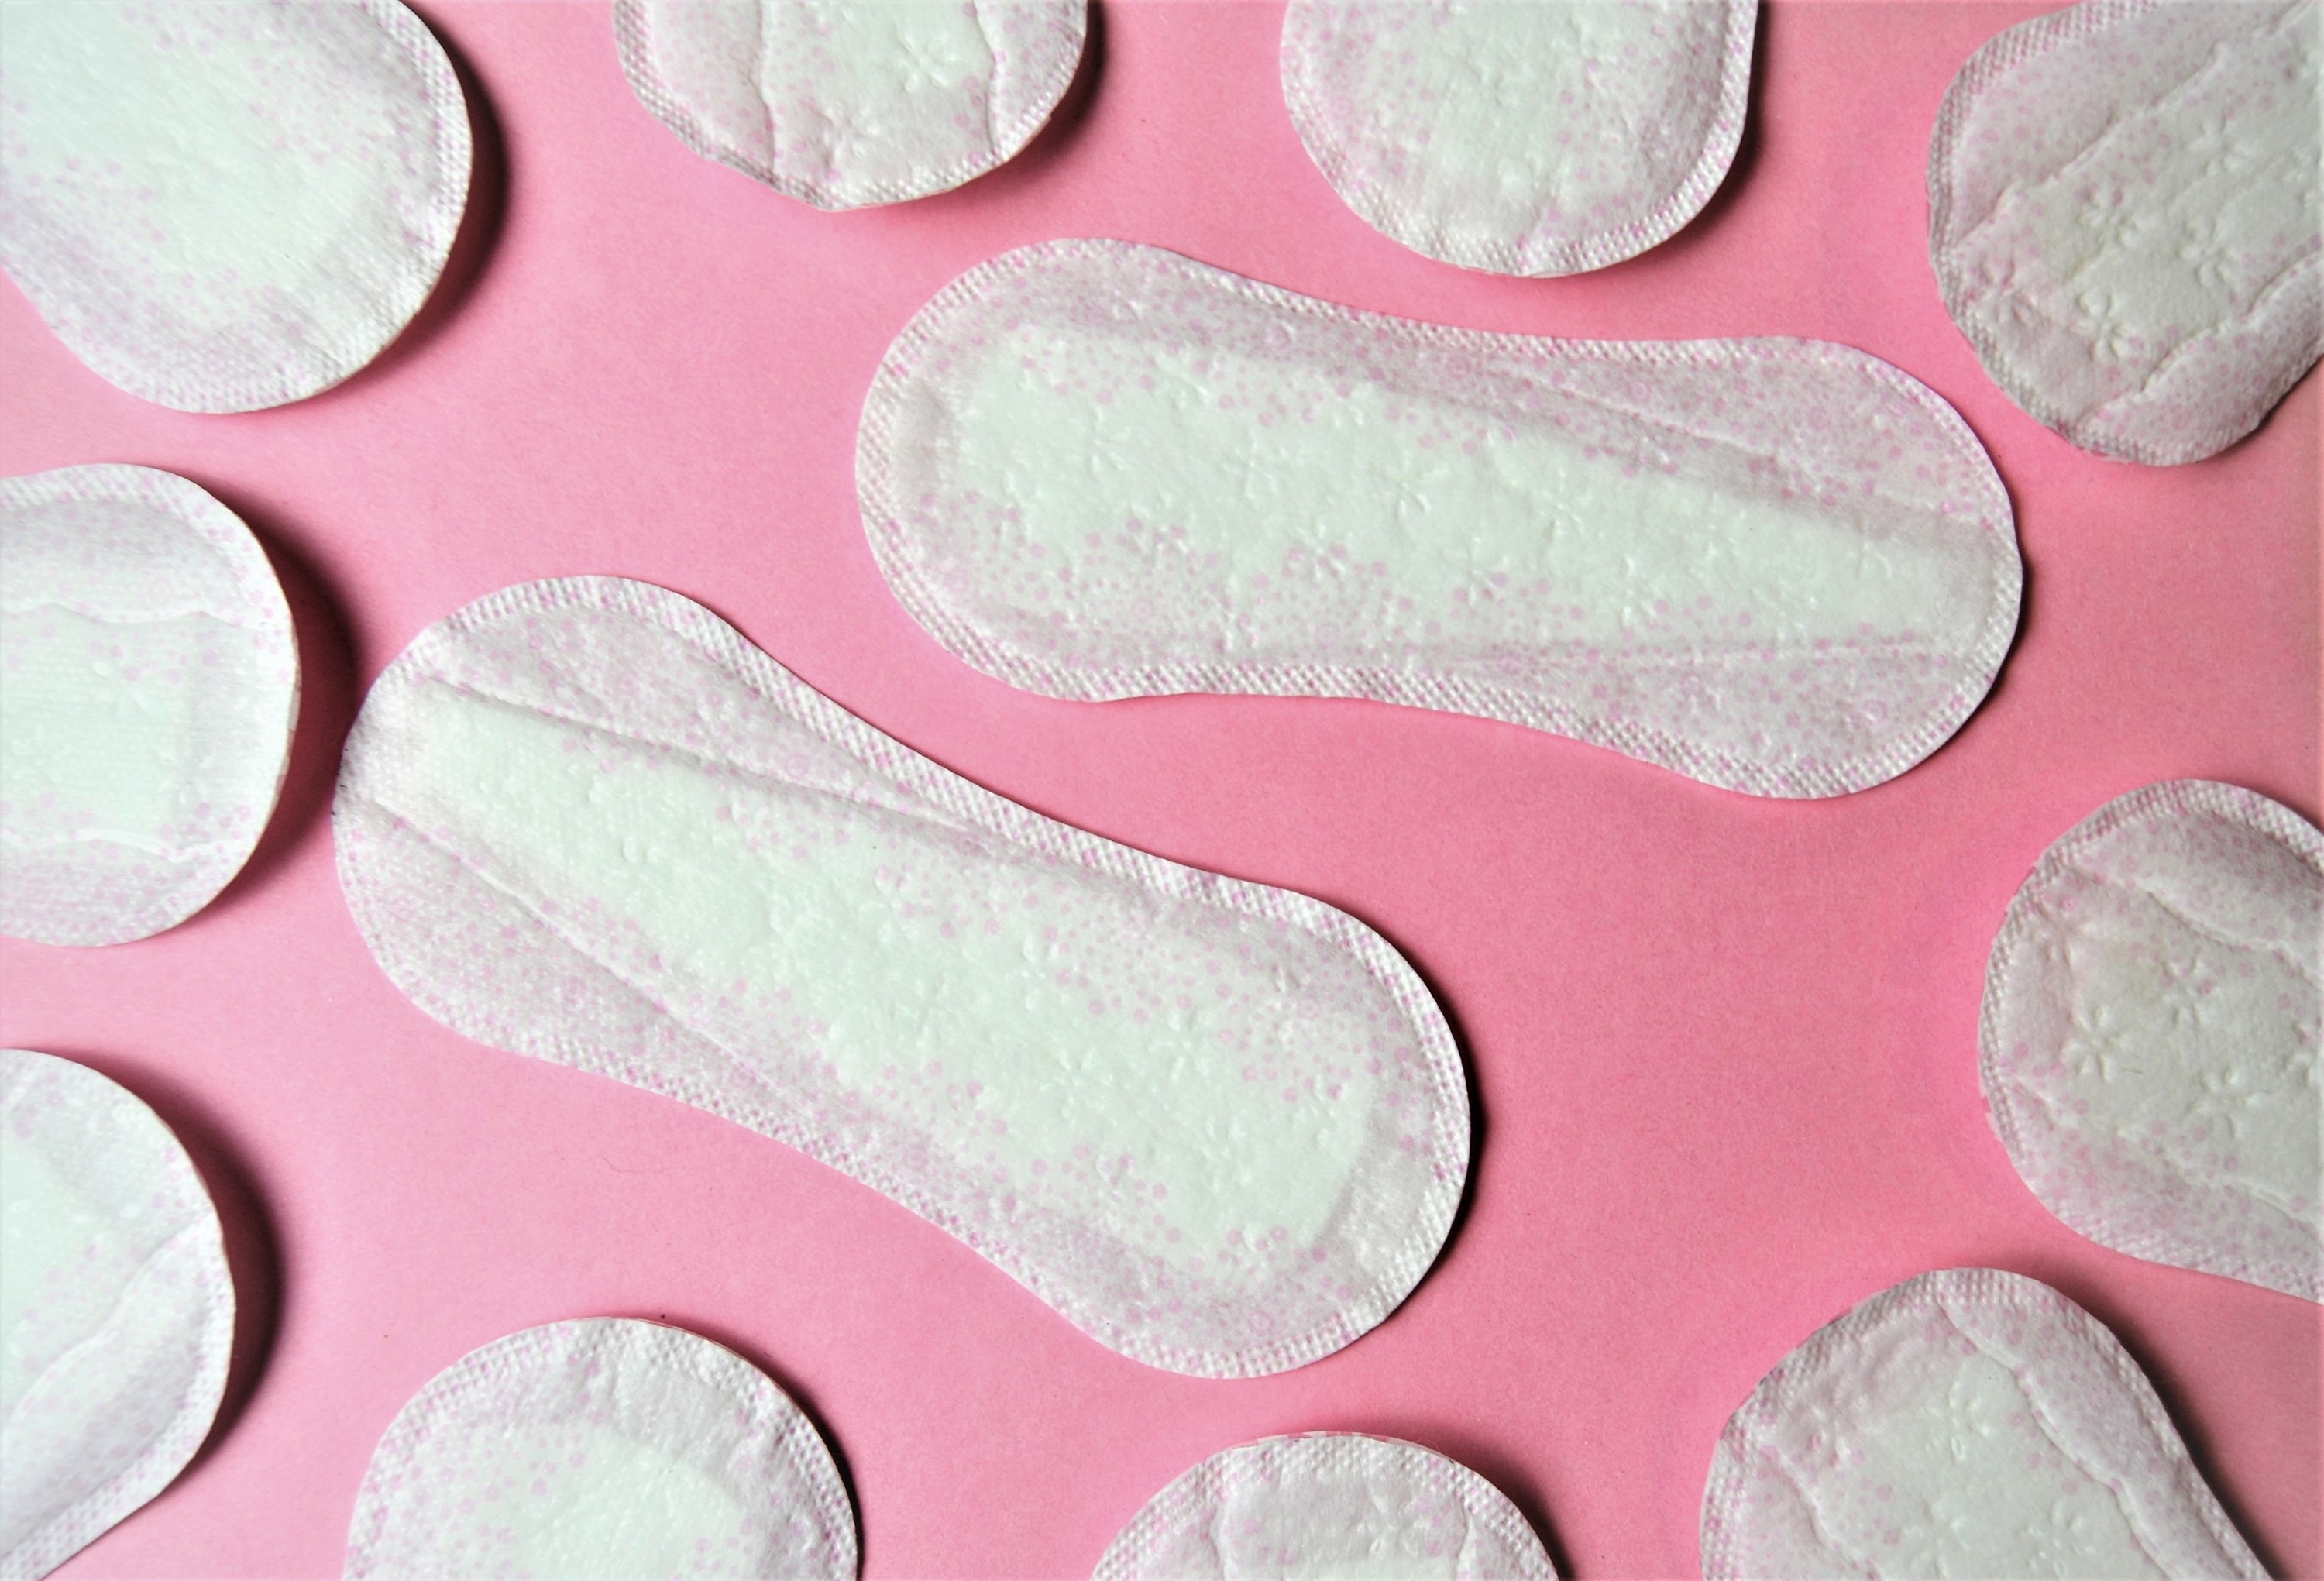 An image of menstrual pads on a pink background